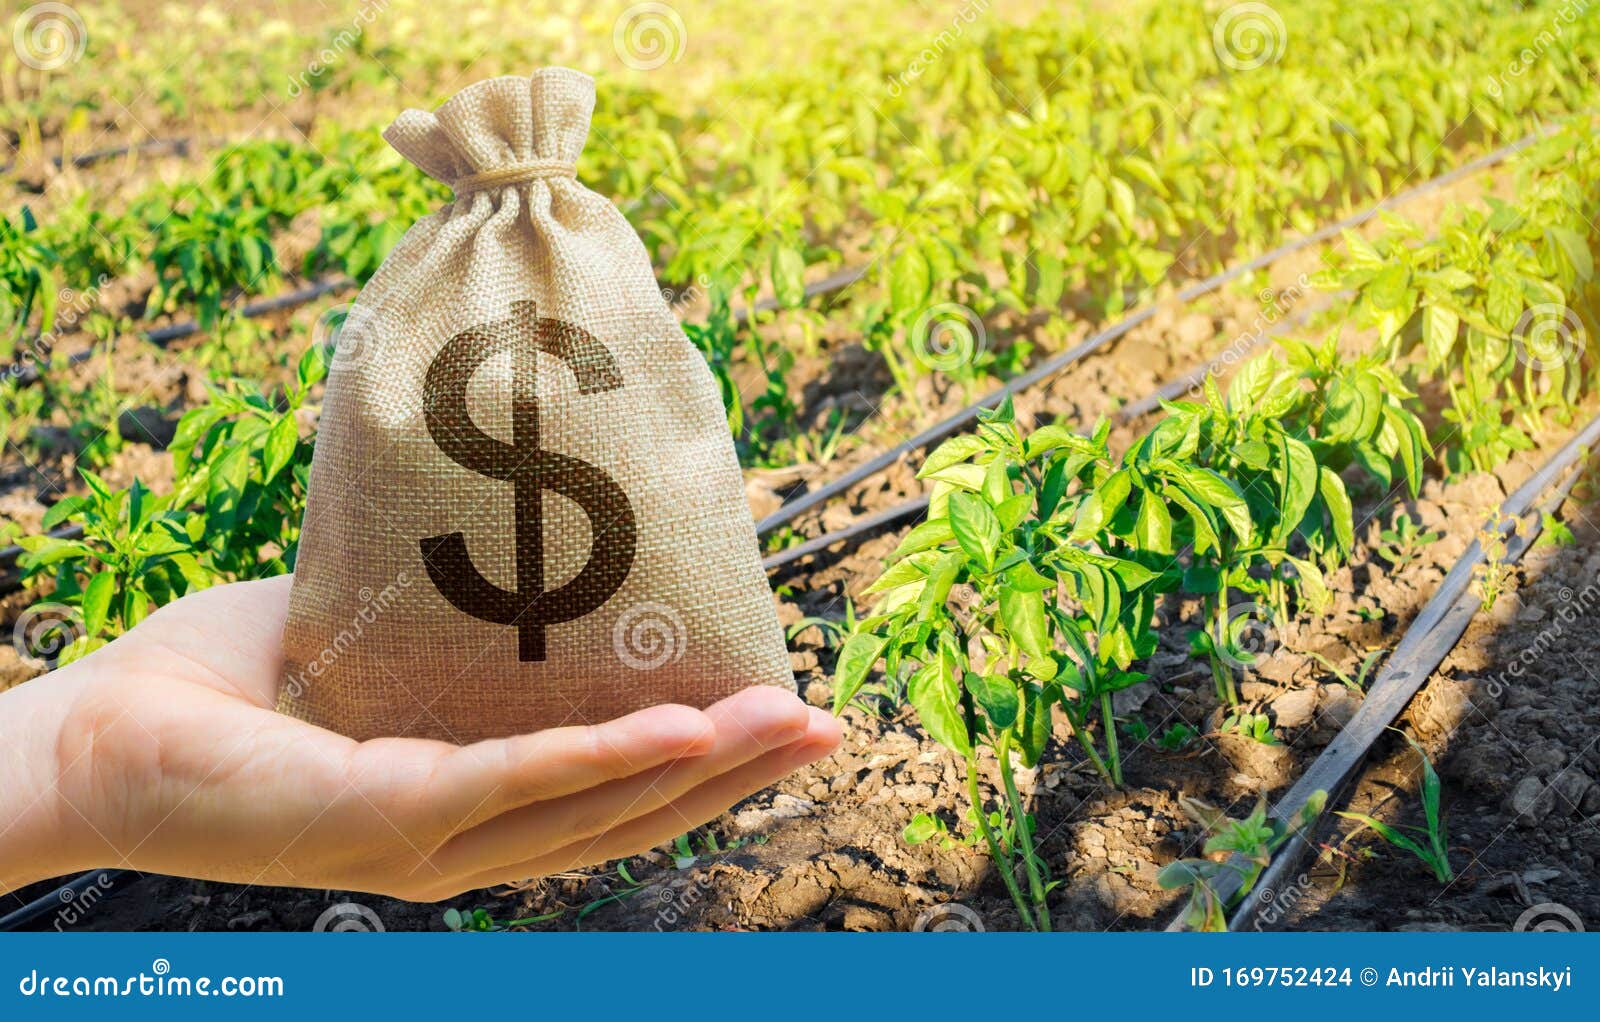 money bag on the background of agricultural crops in the hand of the farmer. agricultural startups. profit from agribusiness.